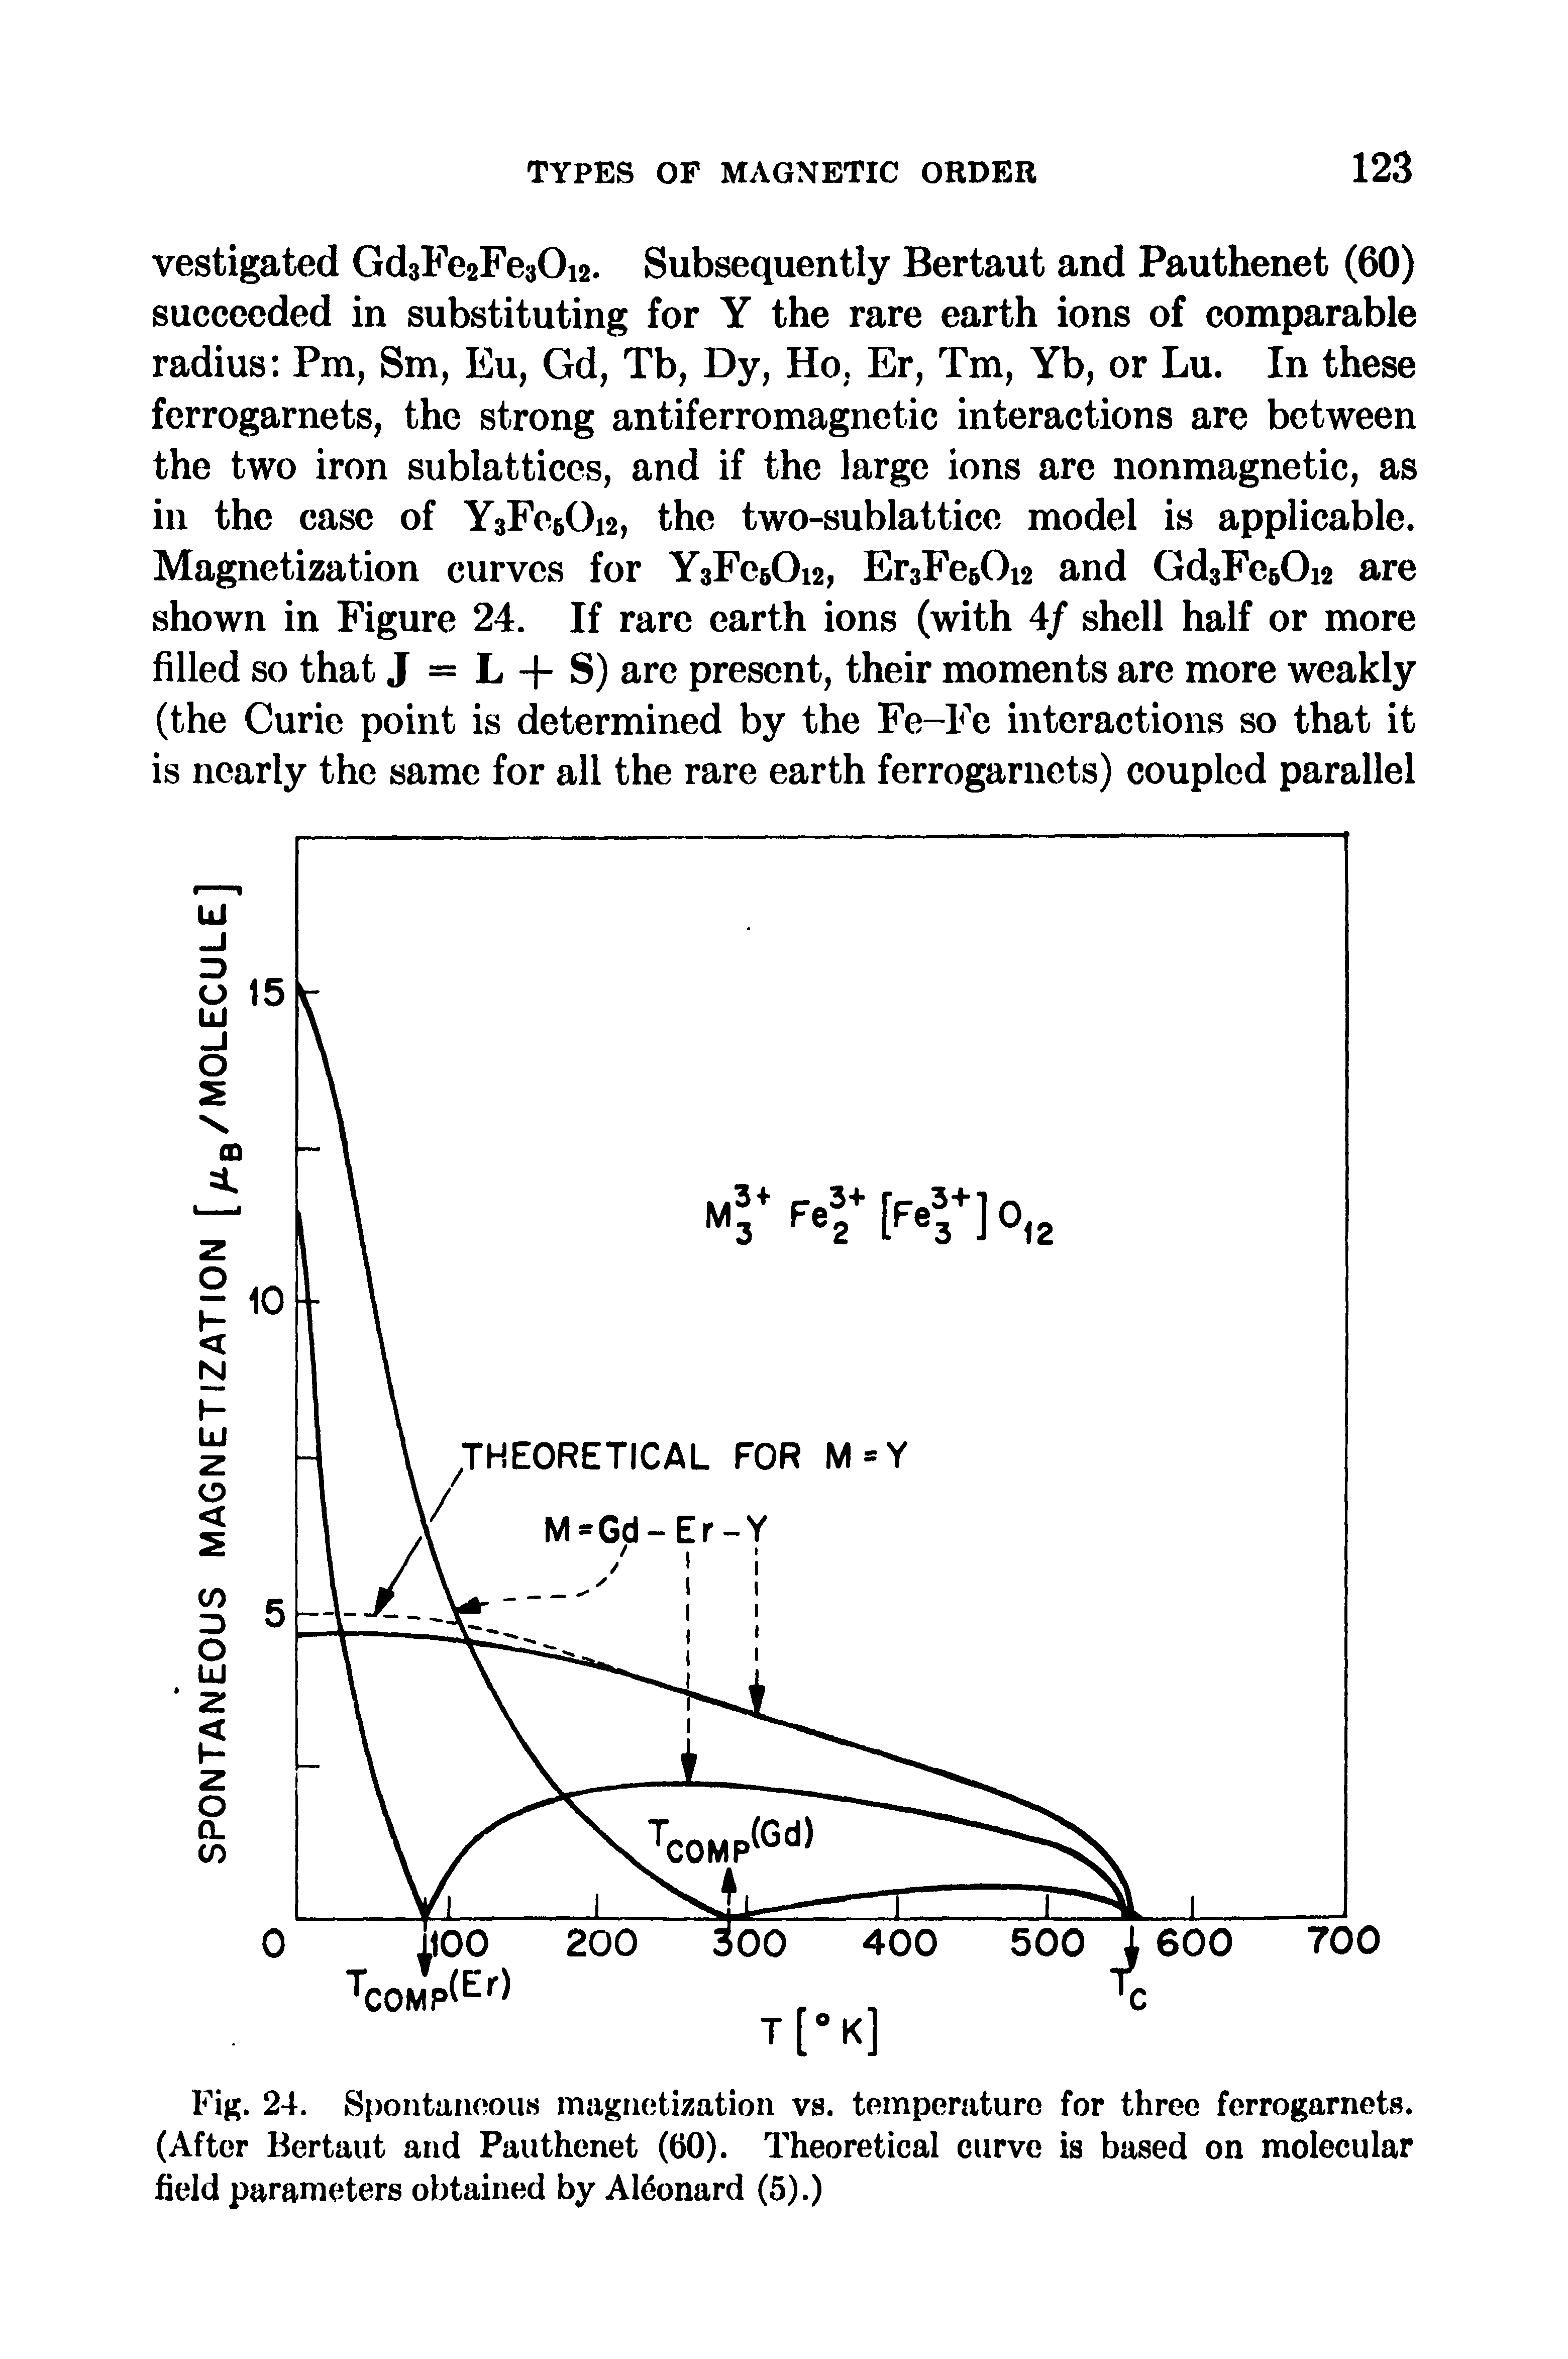 Fig. 24. Spontaneous magnetization vs. temperature for three ferrogarnets. (After Bertaut and Pauthenet (60). Theoretical curve is based on molecular field parameters obtained by Al mard (5).)...